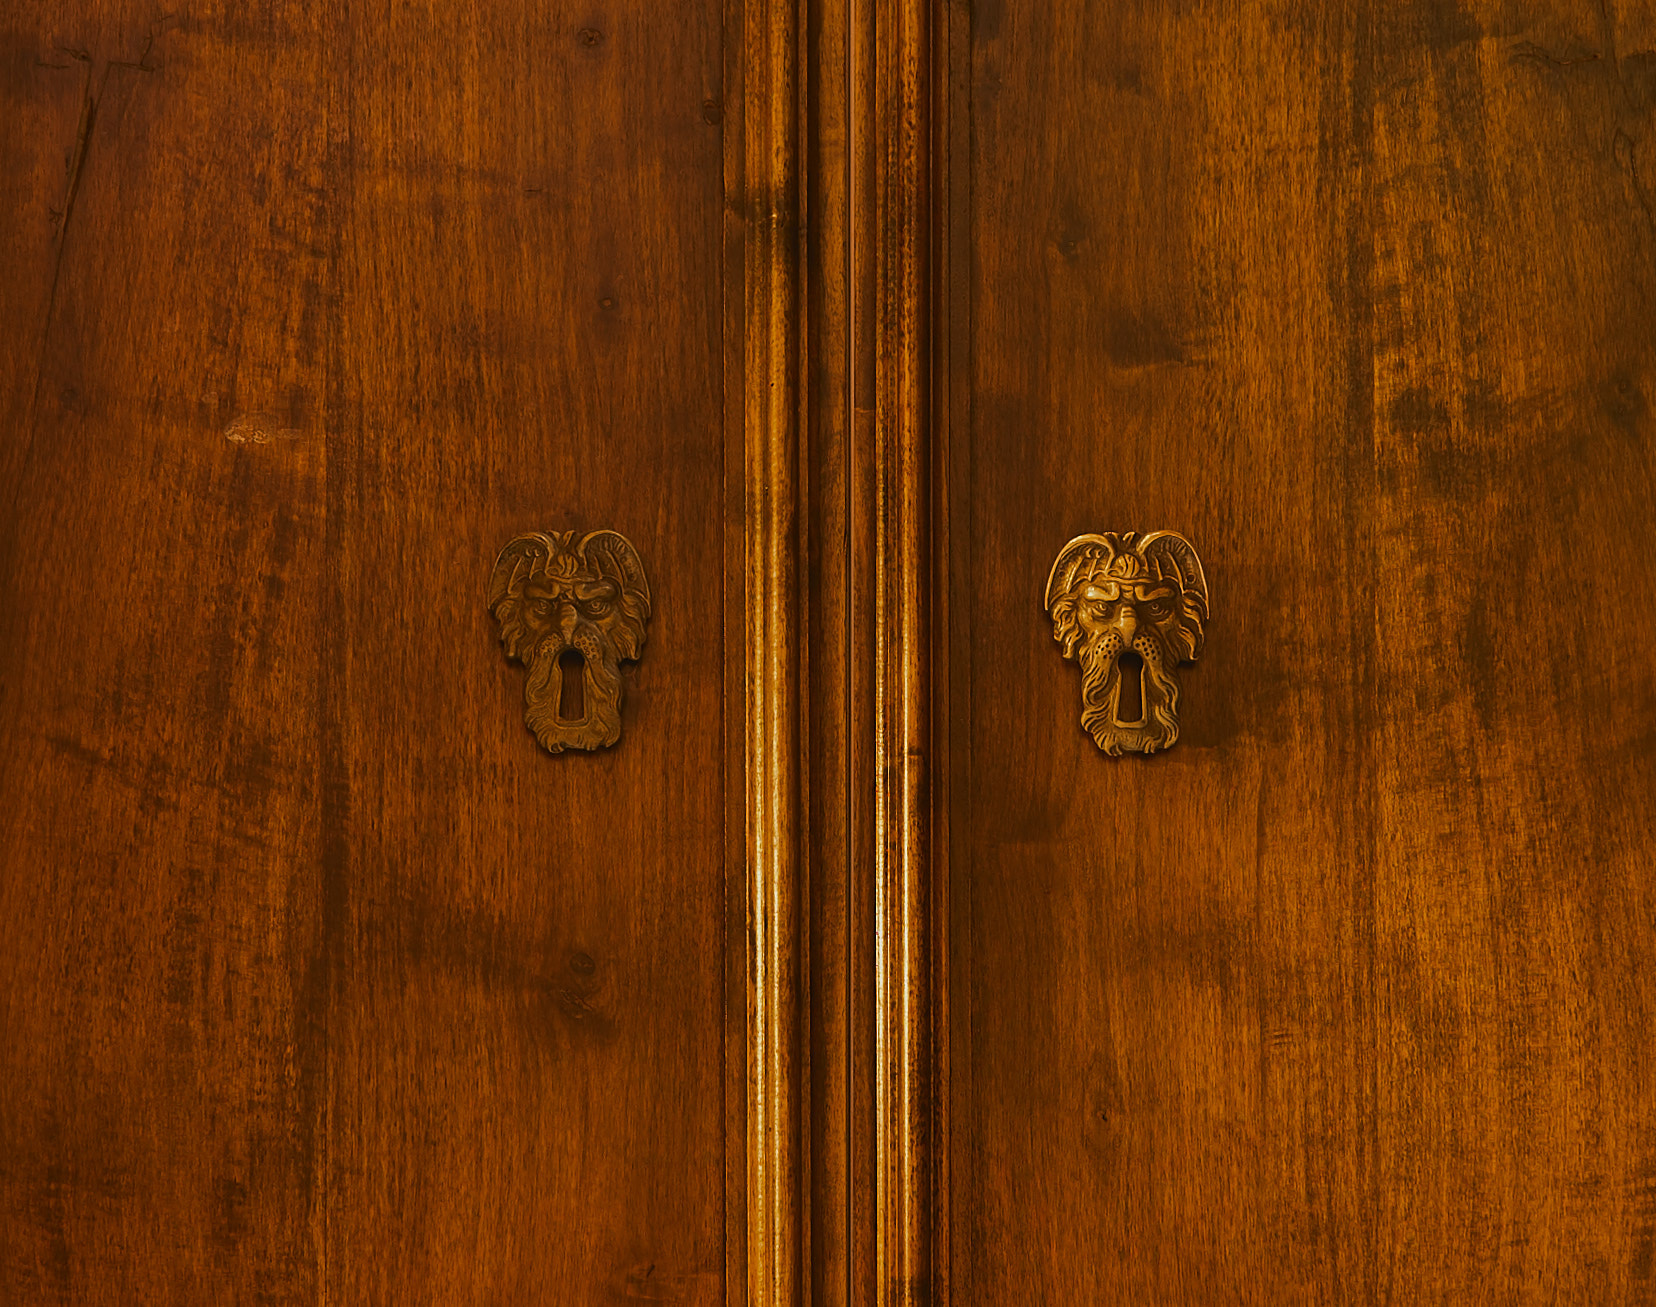 Phase One IQ250 sample photo. Wooden door in bologna photography